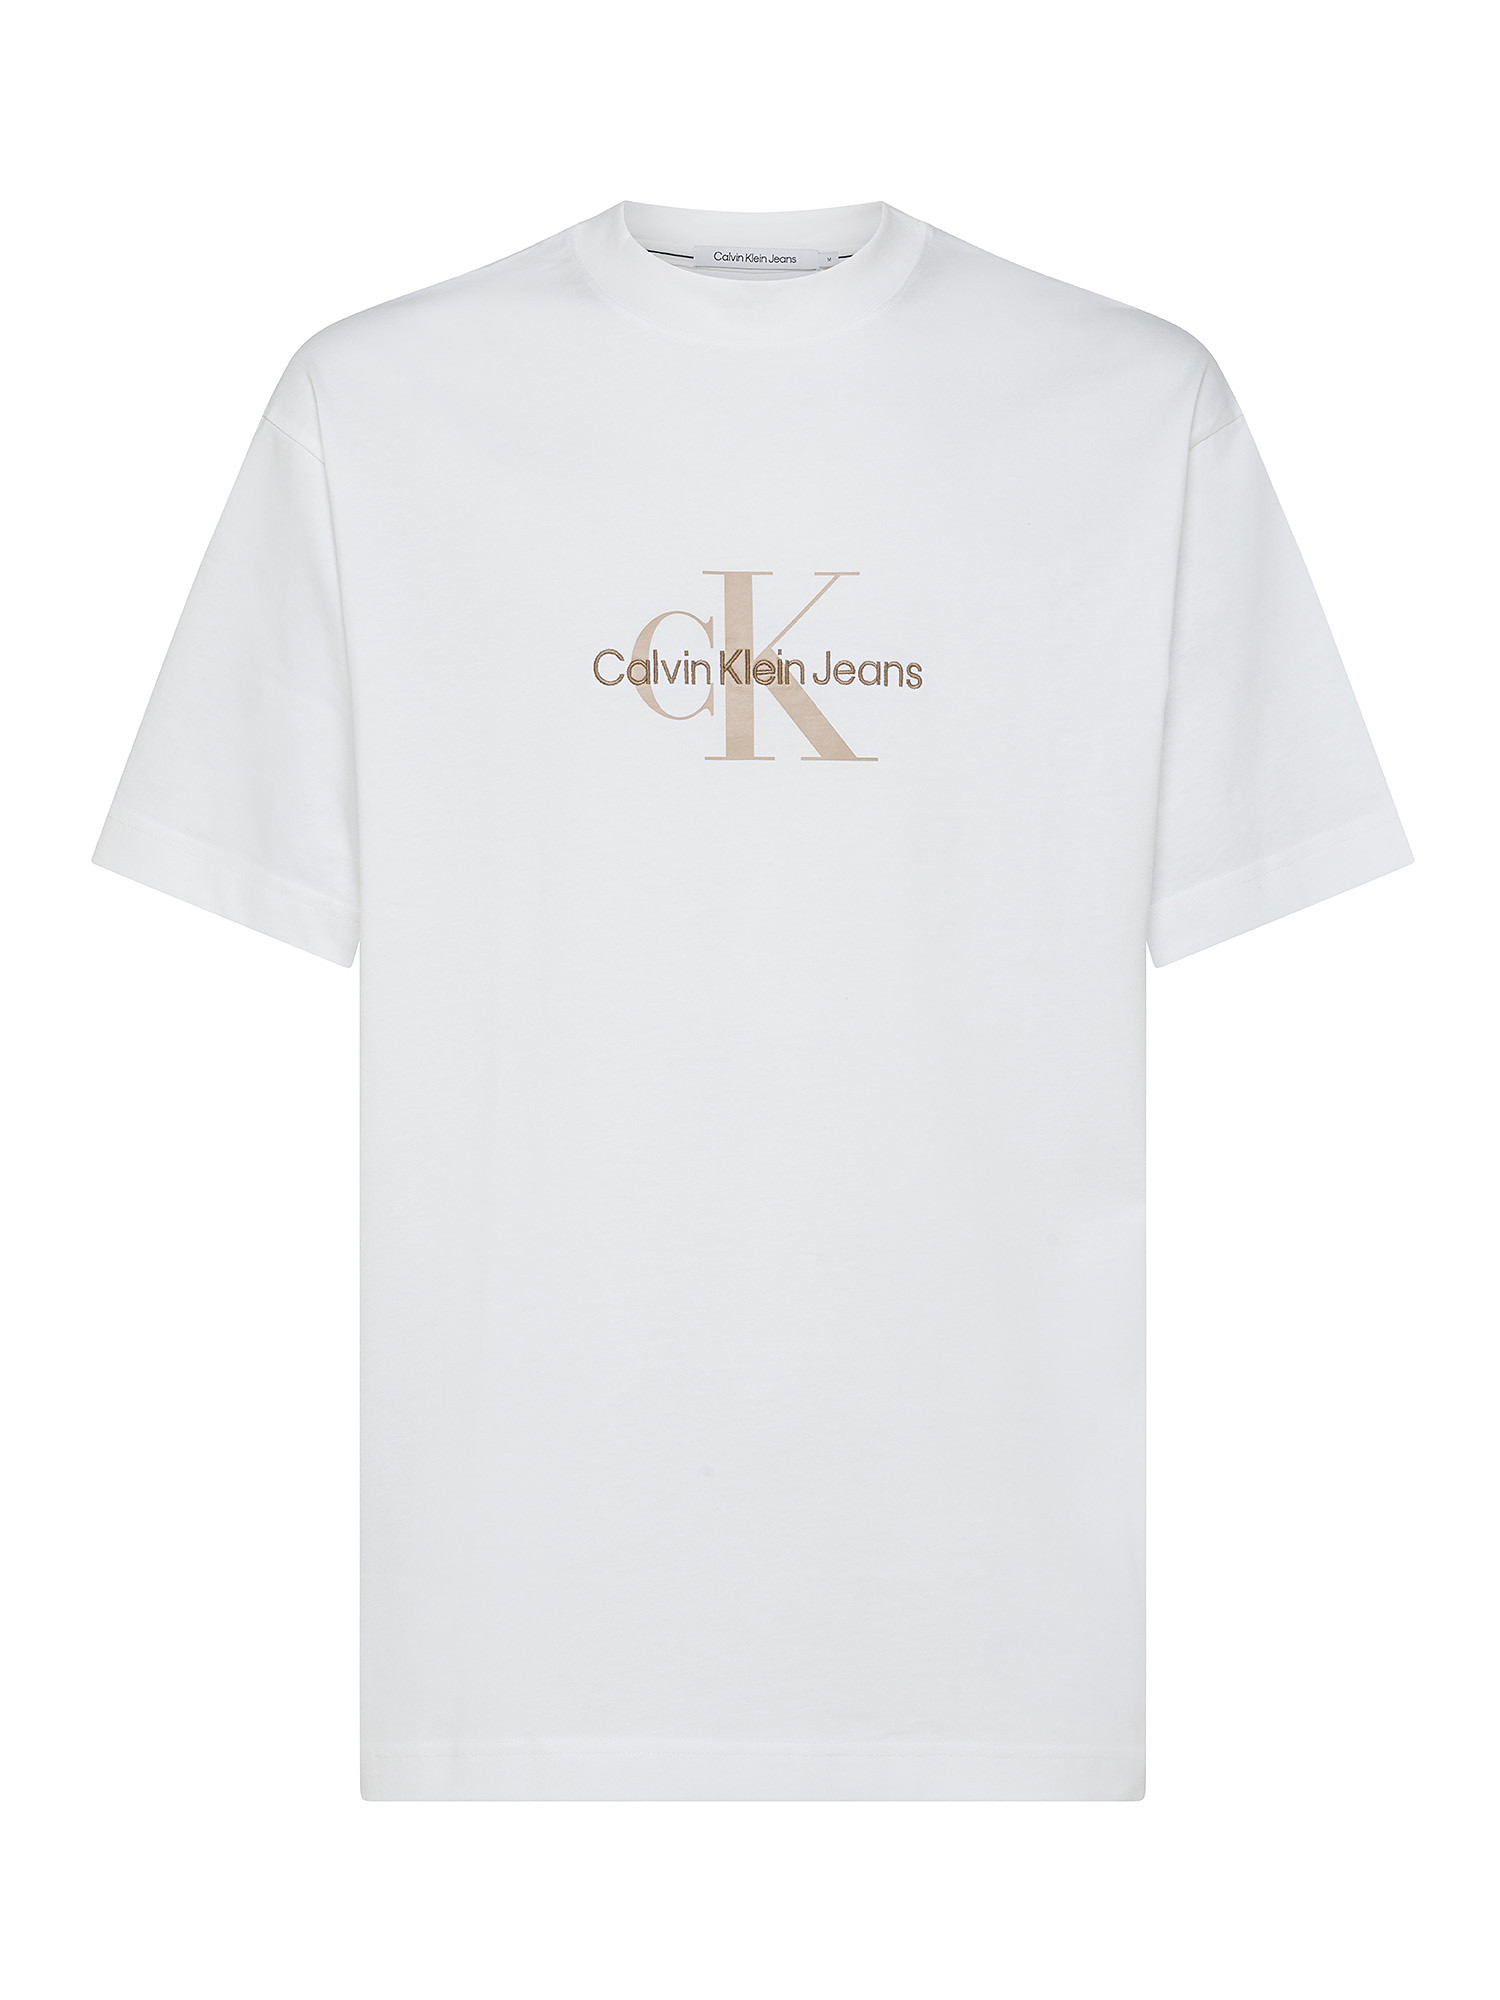 Calvin Klein Jeans - T-shirt oversize in cotone con logo, Bianco, large image number 0